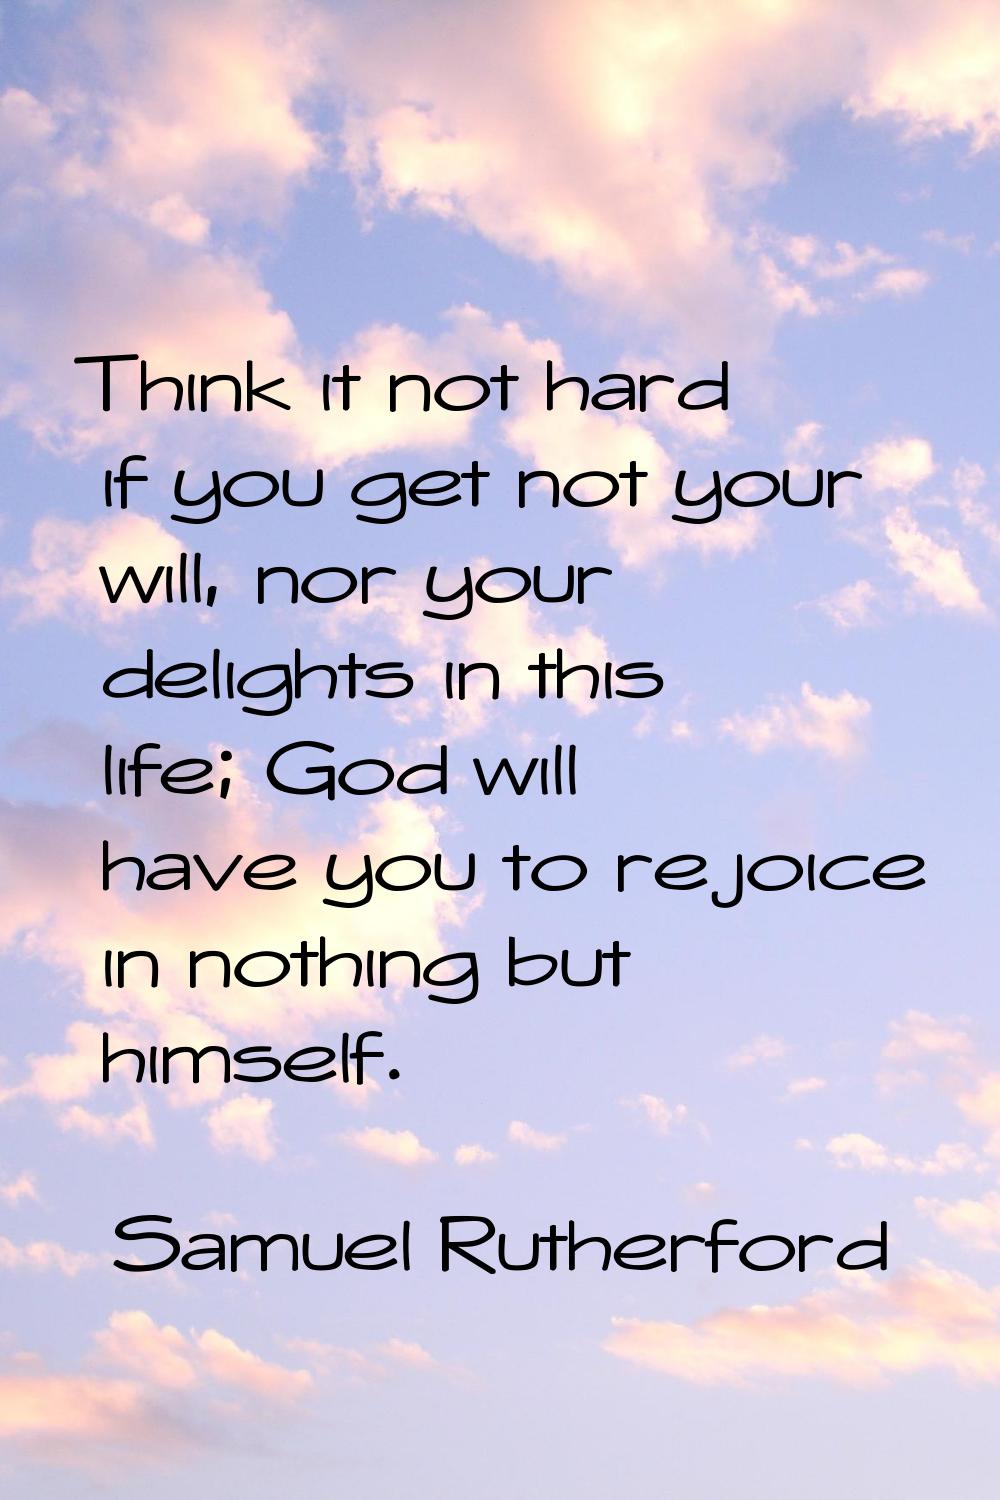 Think it not hard if you get not your will, nor your delights in this life; God will have you to re